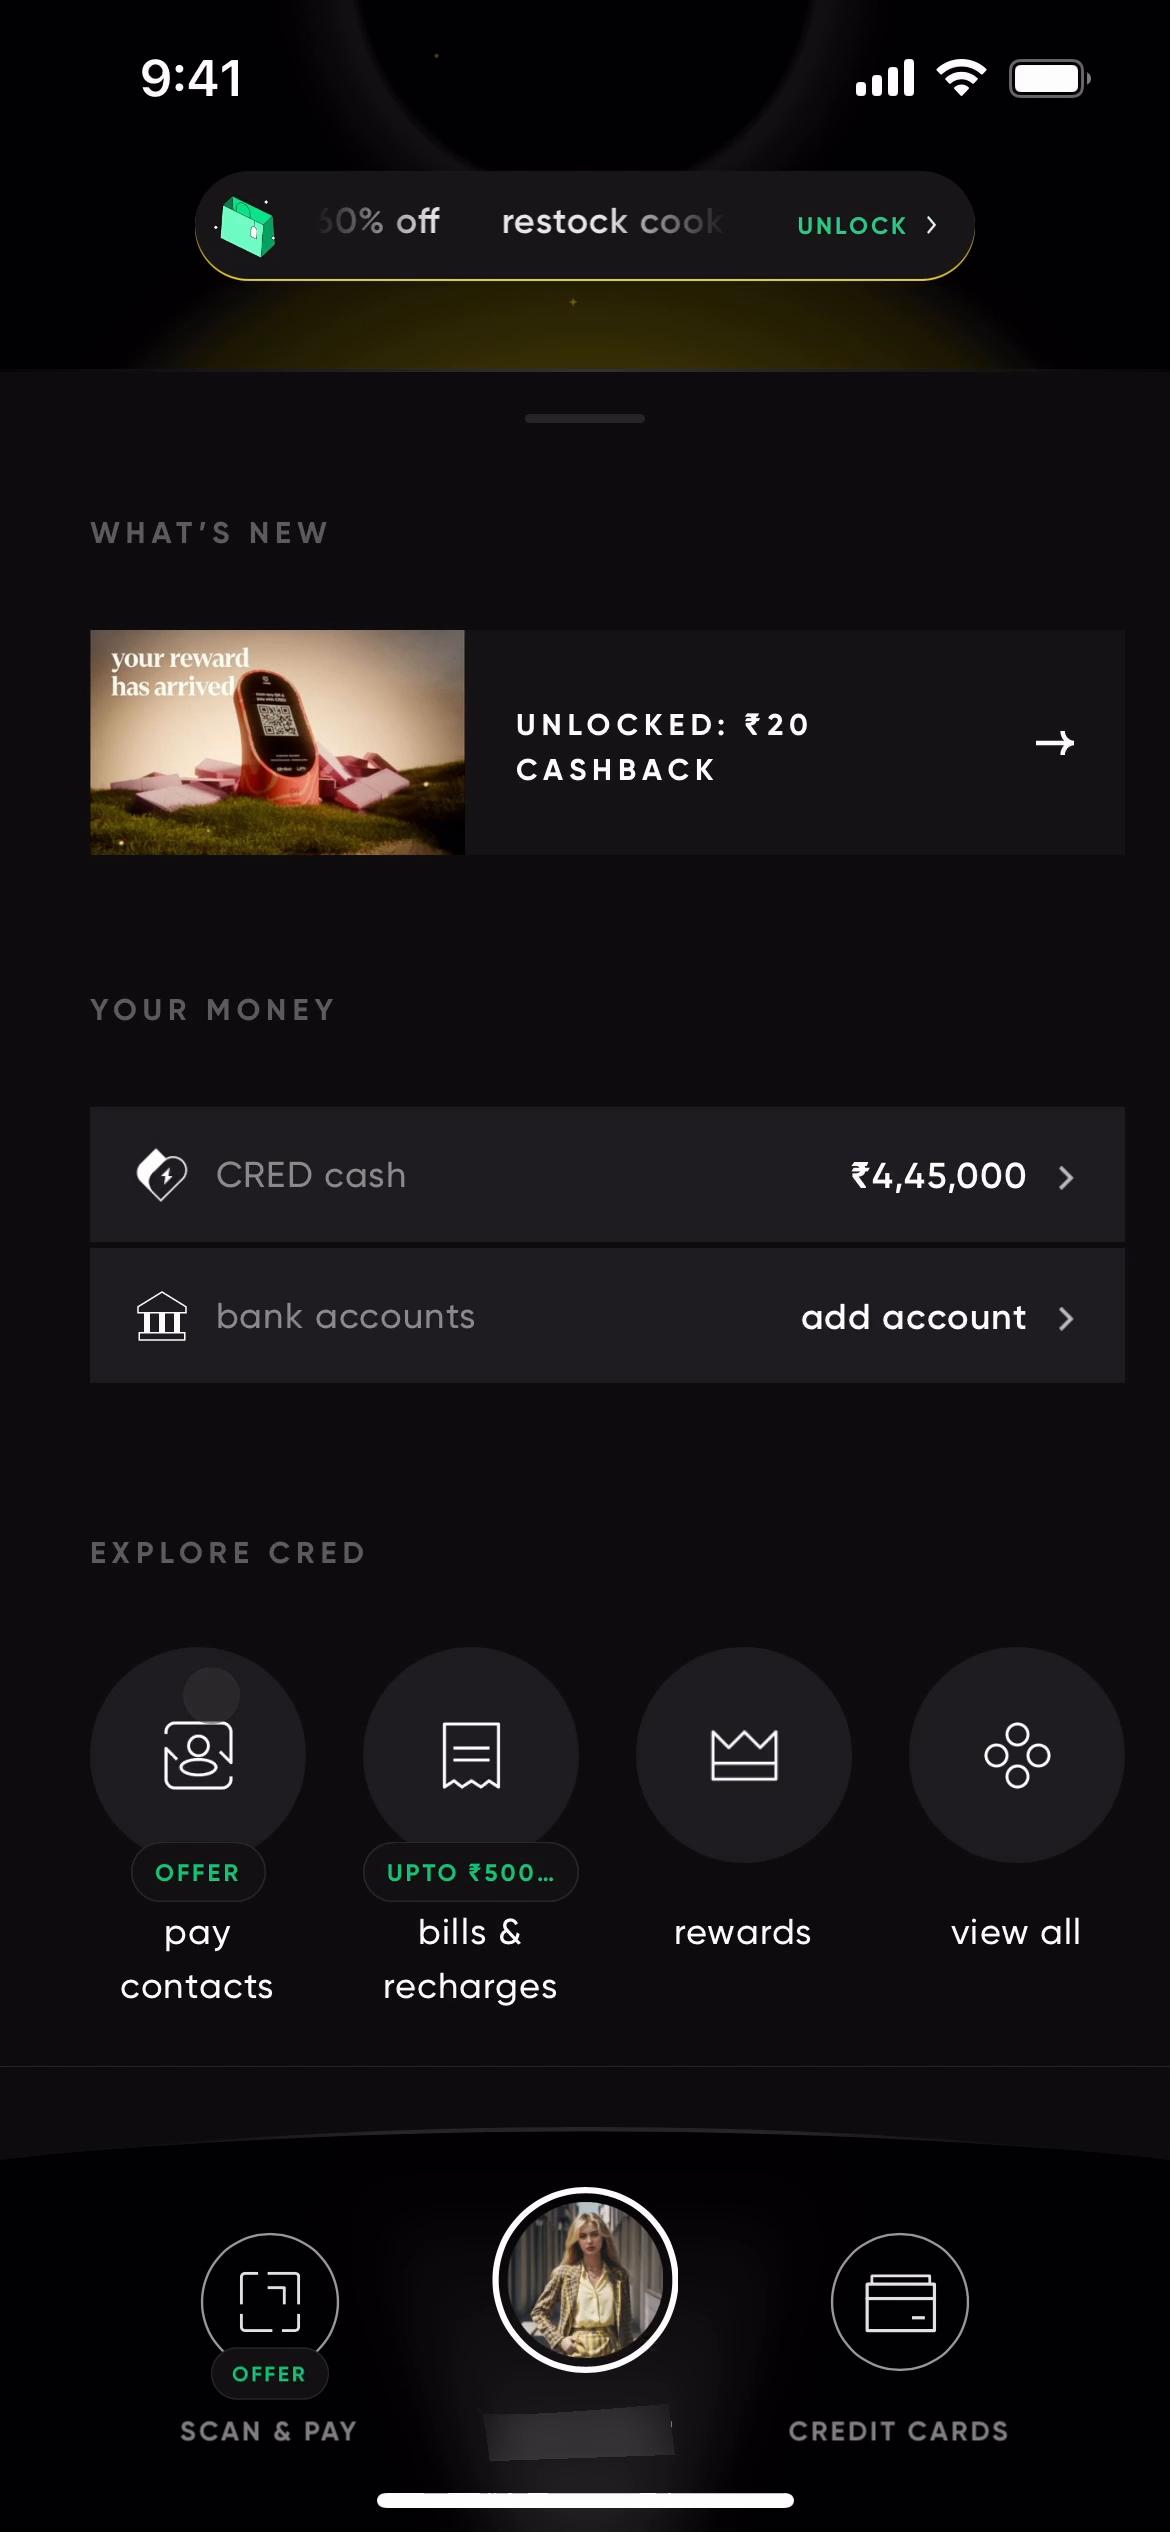 Making a payment on CRED video screenshot